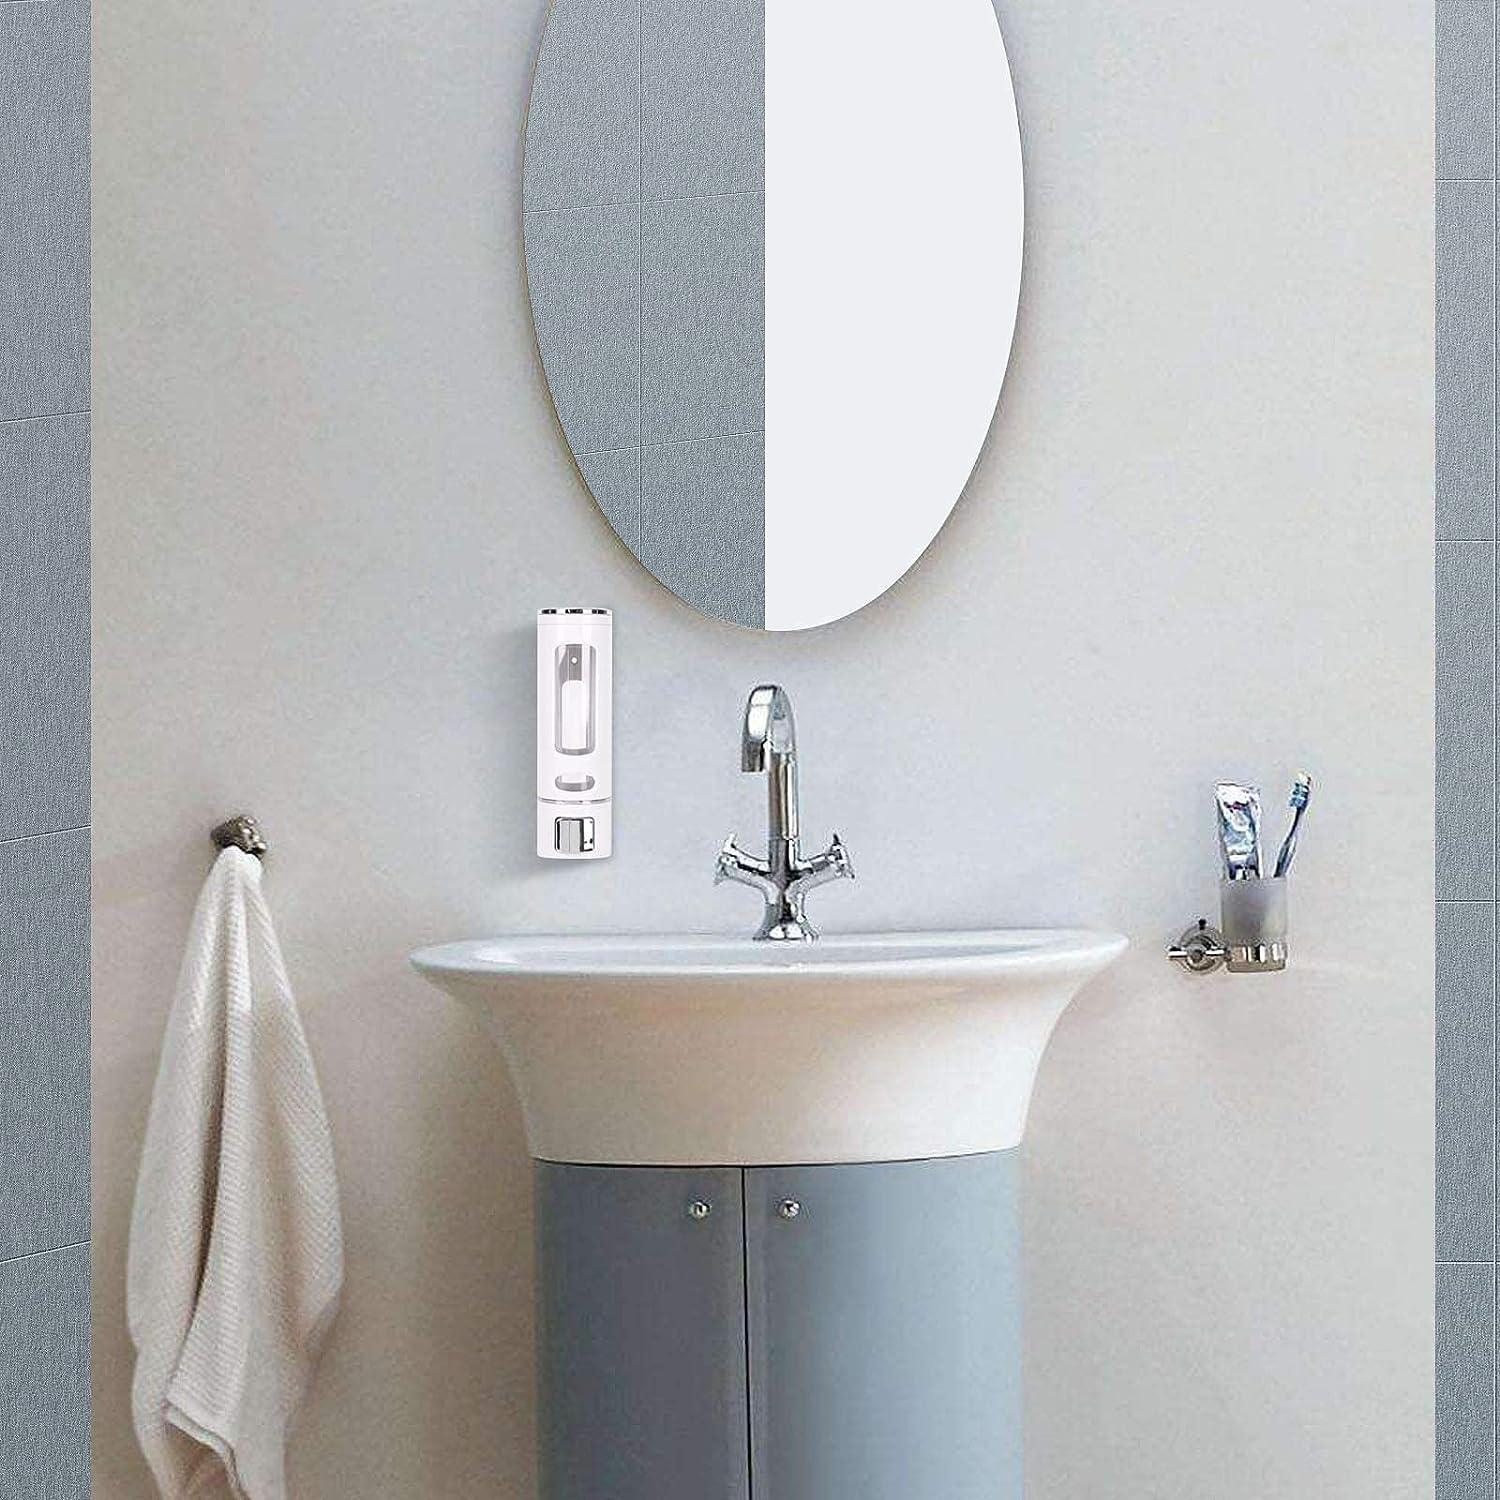 Soap Dispenser Wall Mounted 400ml Capacity for Bathrooms, Kitchens - Massive Discounts